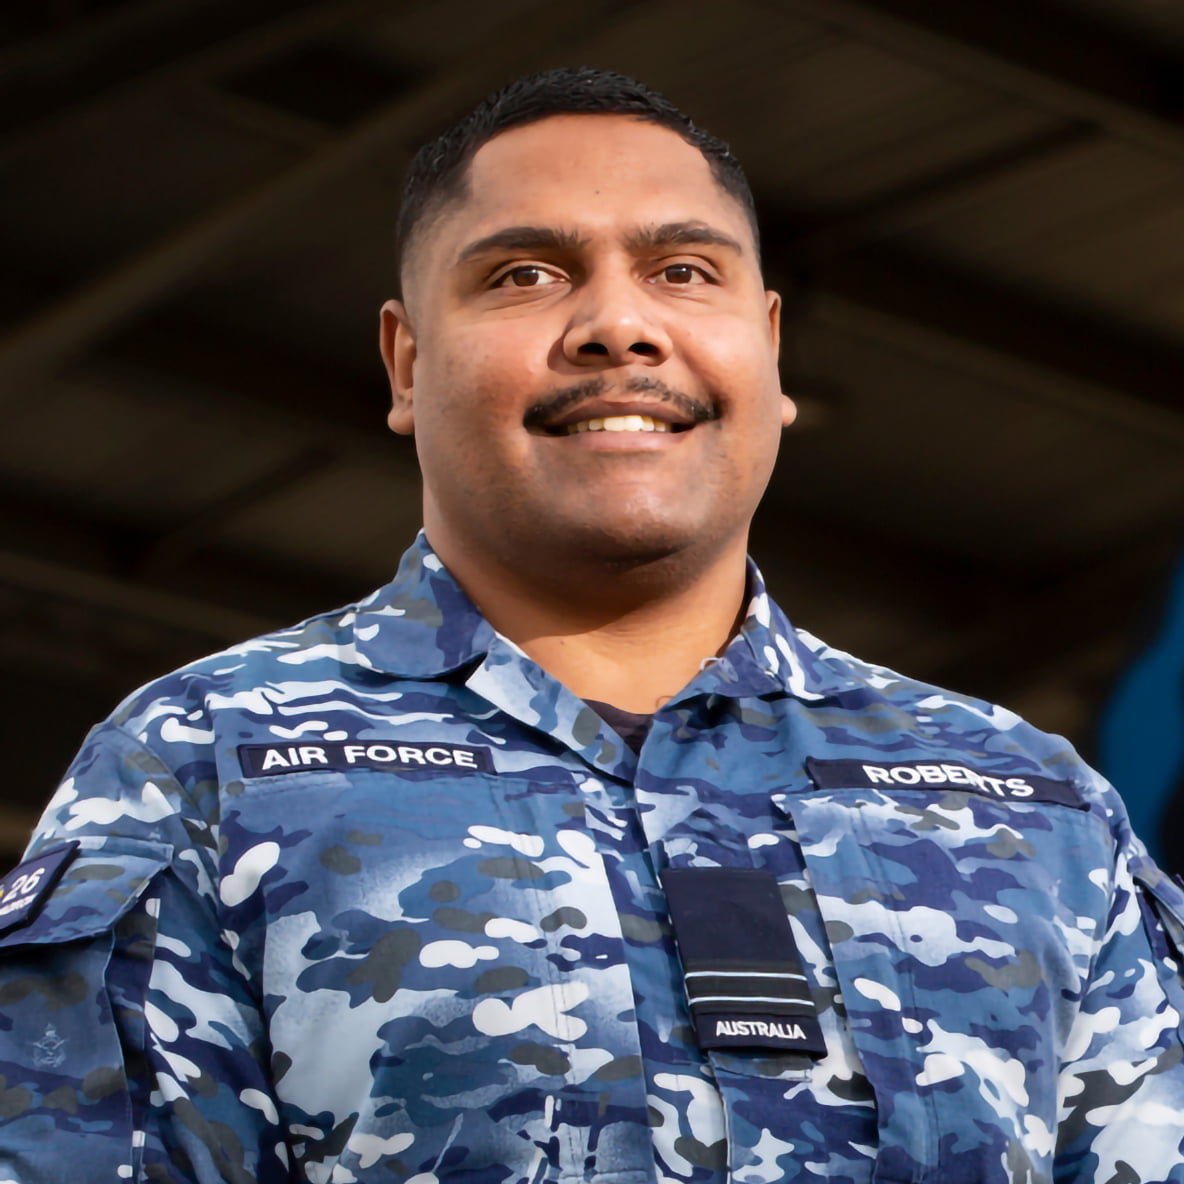 A member of the Air Force smiling.